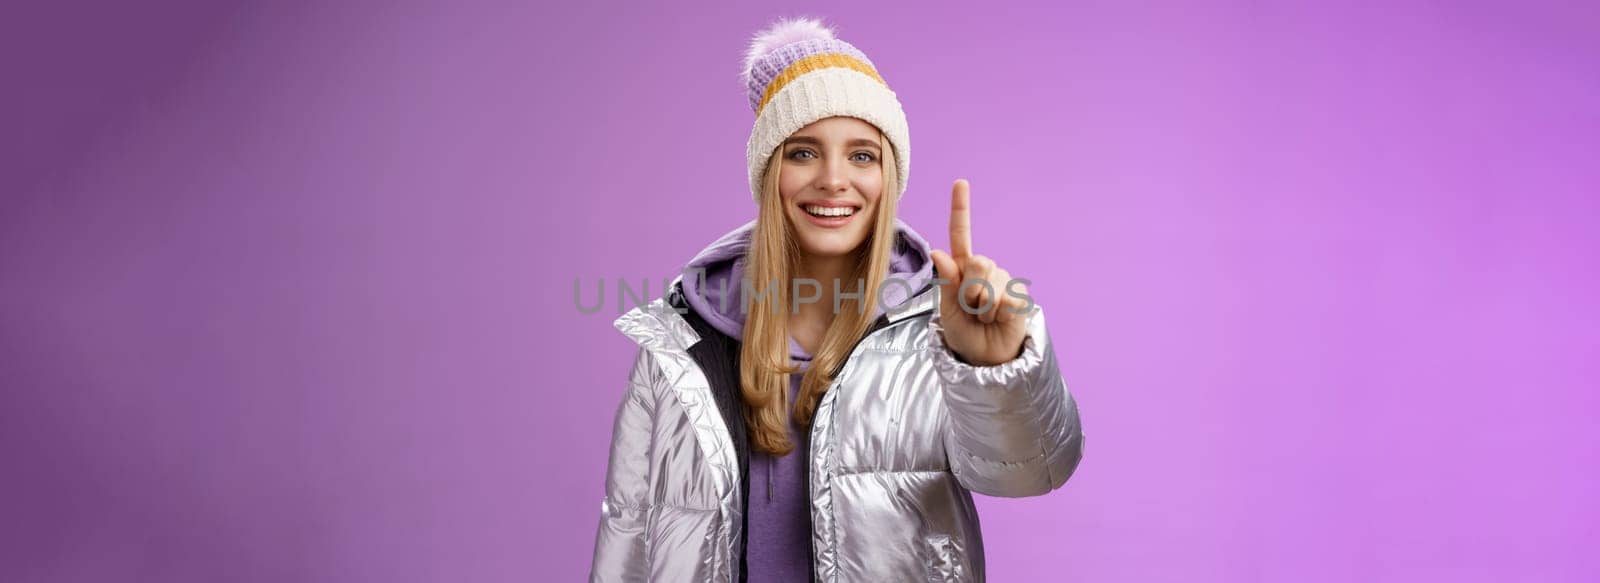 Excited cheerful fair-haired european girl in winter hat silver shiny jacket show number one index fingers give suggestion advice smiling broadly talking happily, purple background. Copy space